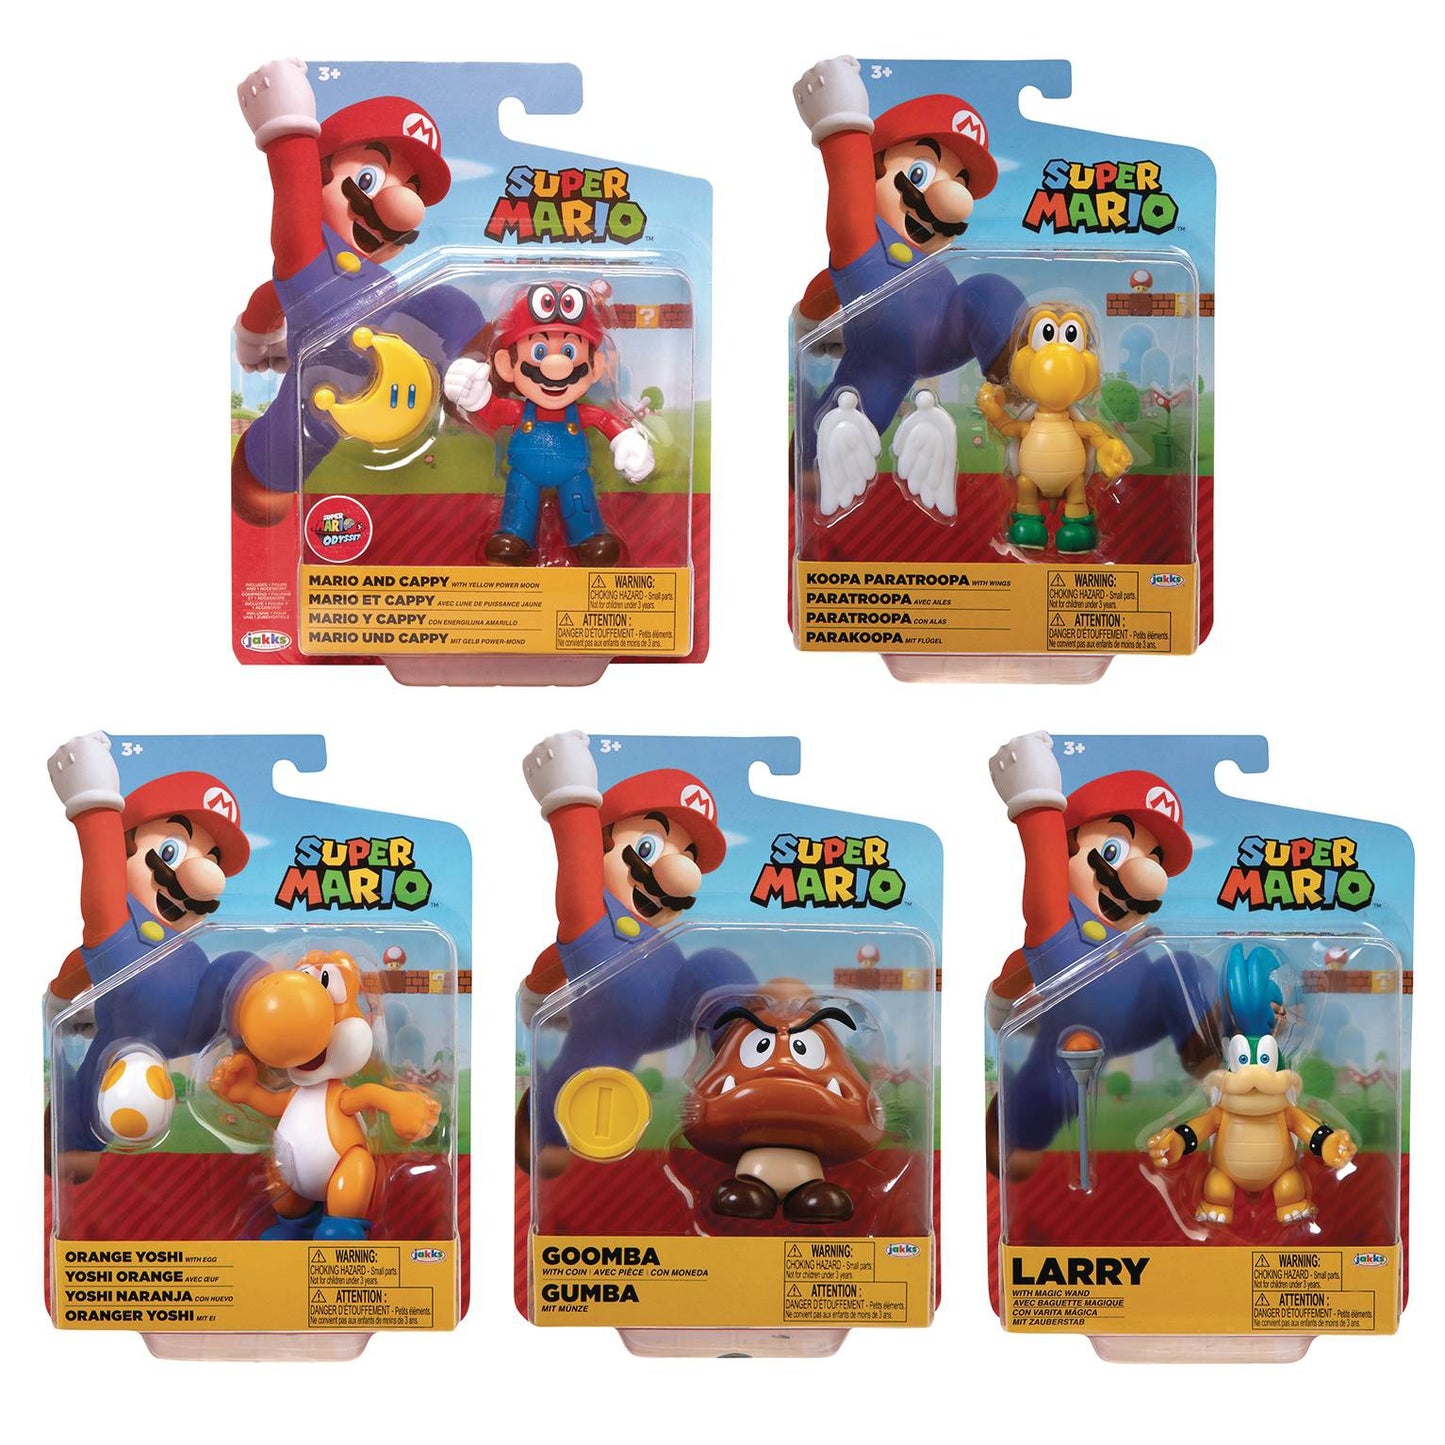 Super Mario - Goomba with Coin 4" Action Figure